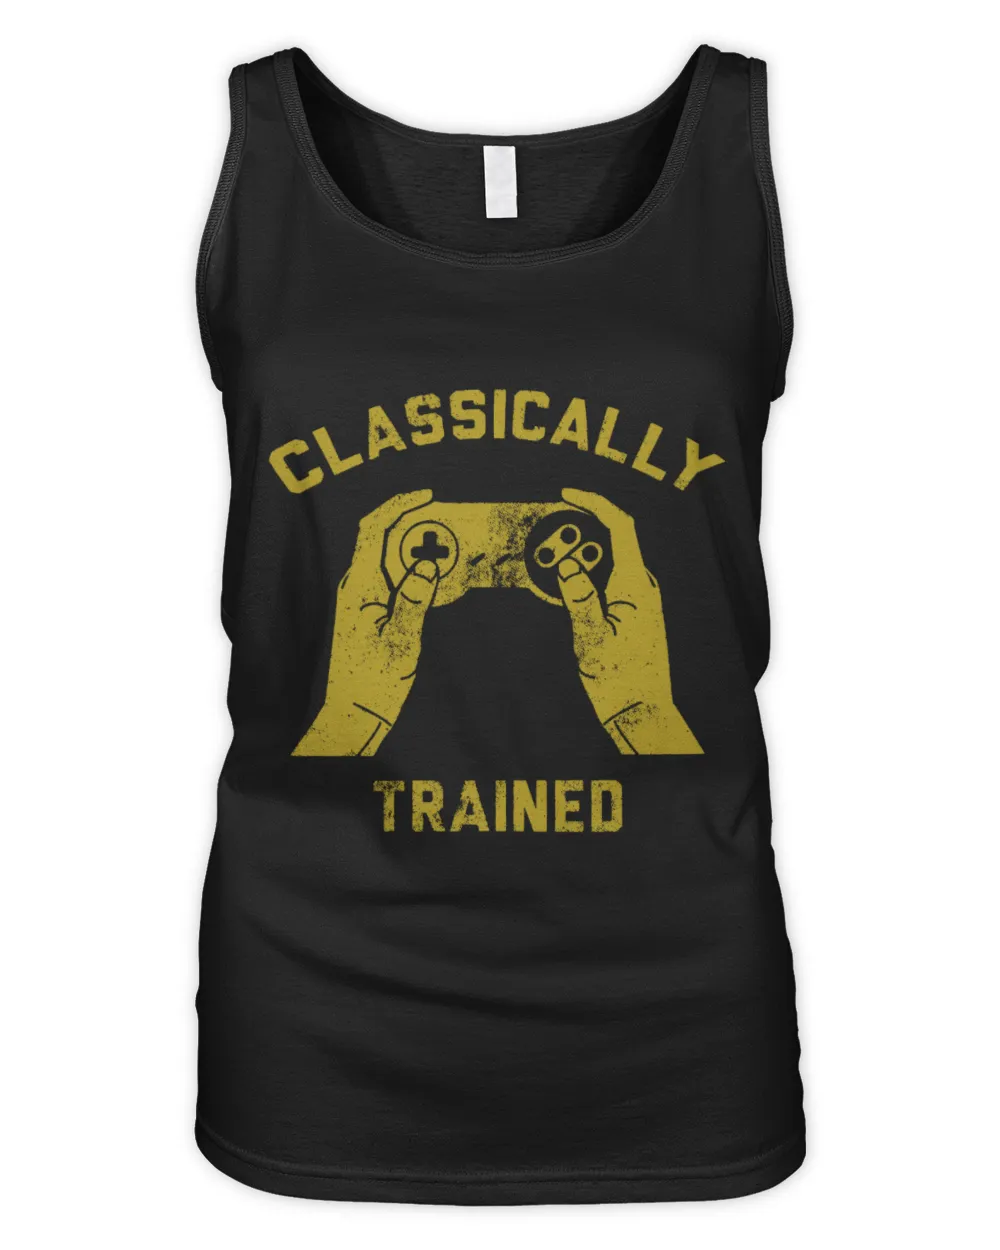 Gamer Shirt, Video Game Shirt, Gamer Gift, Nerdy Shirts, Shirts For Gamers, Funny Gaming Shirt, Classically Trained, Vintage Gaming Systems